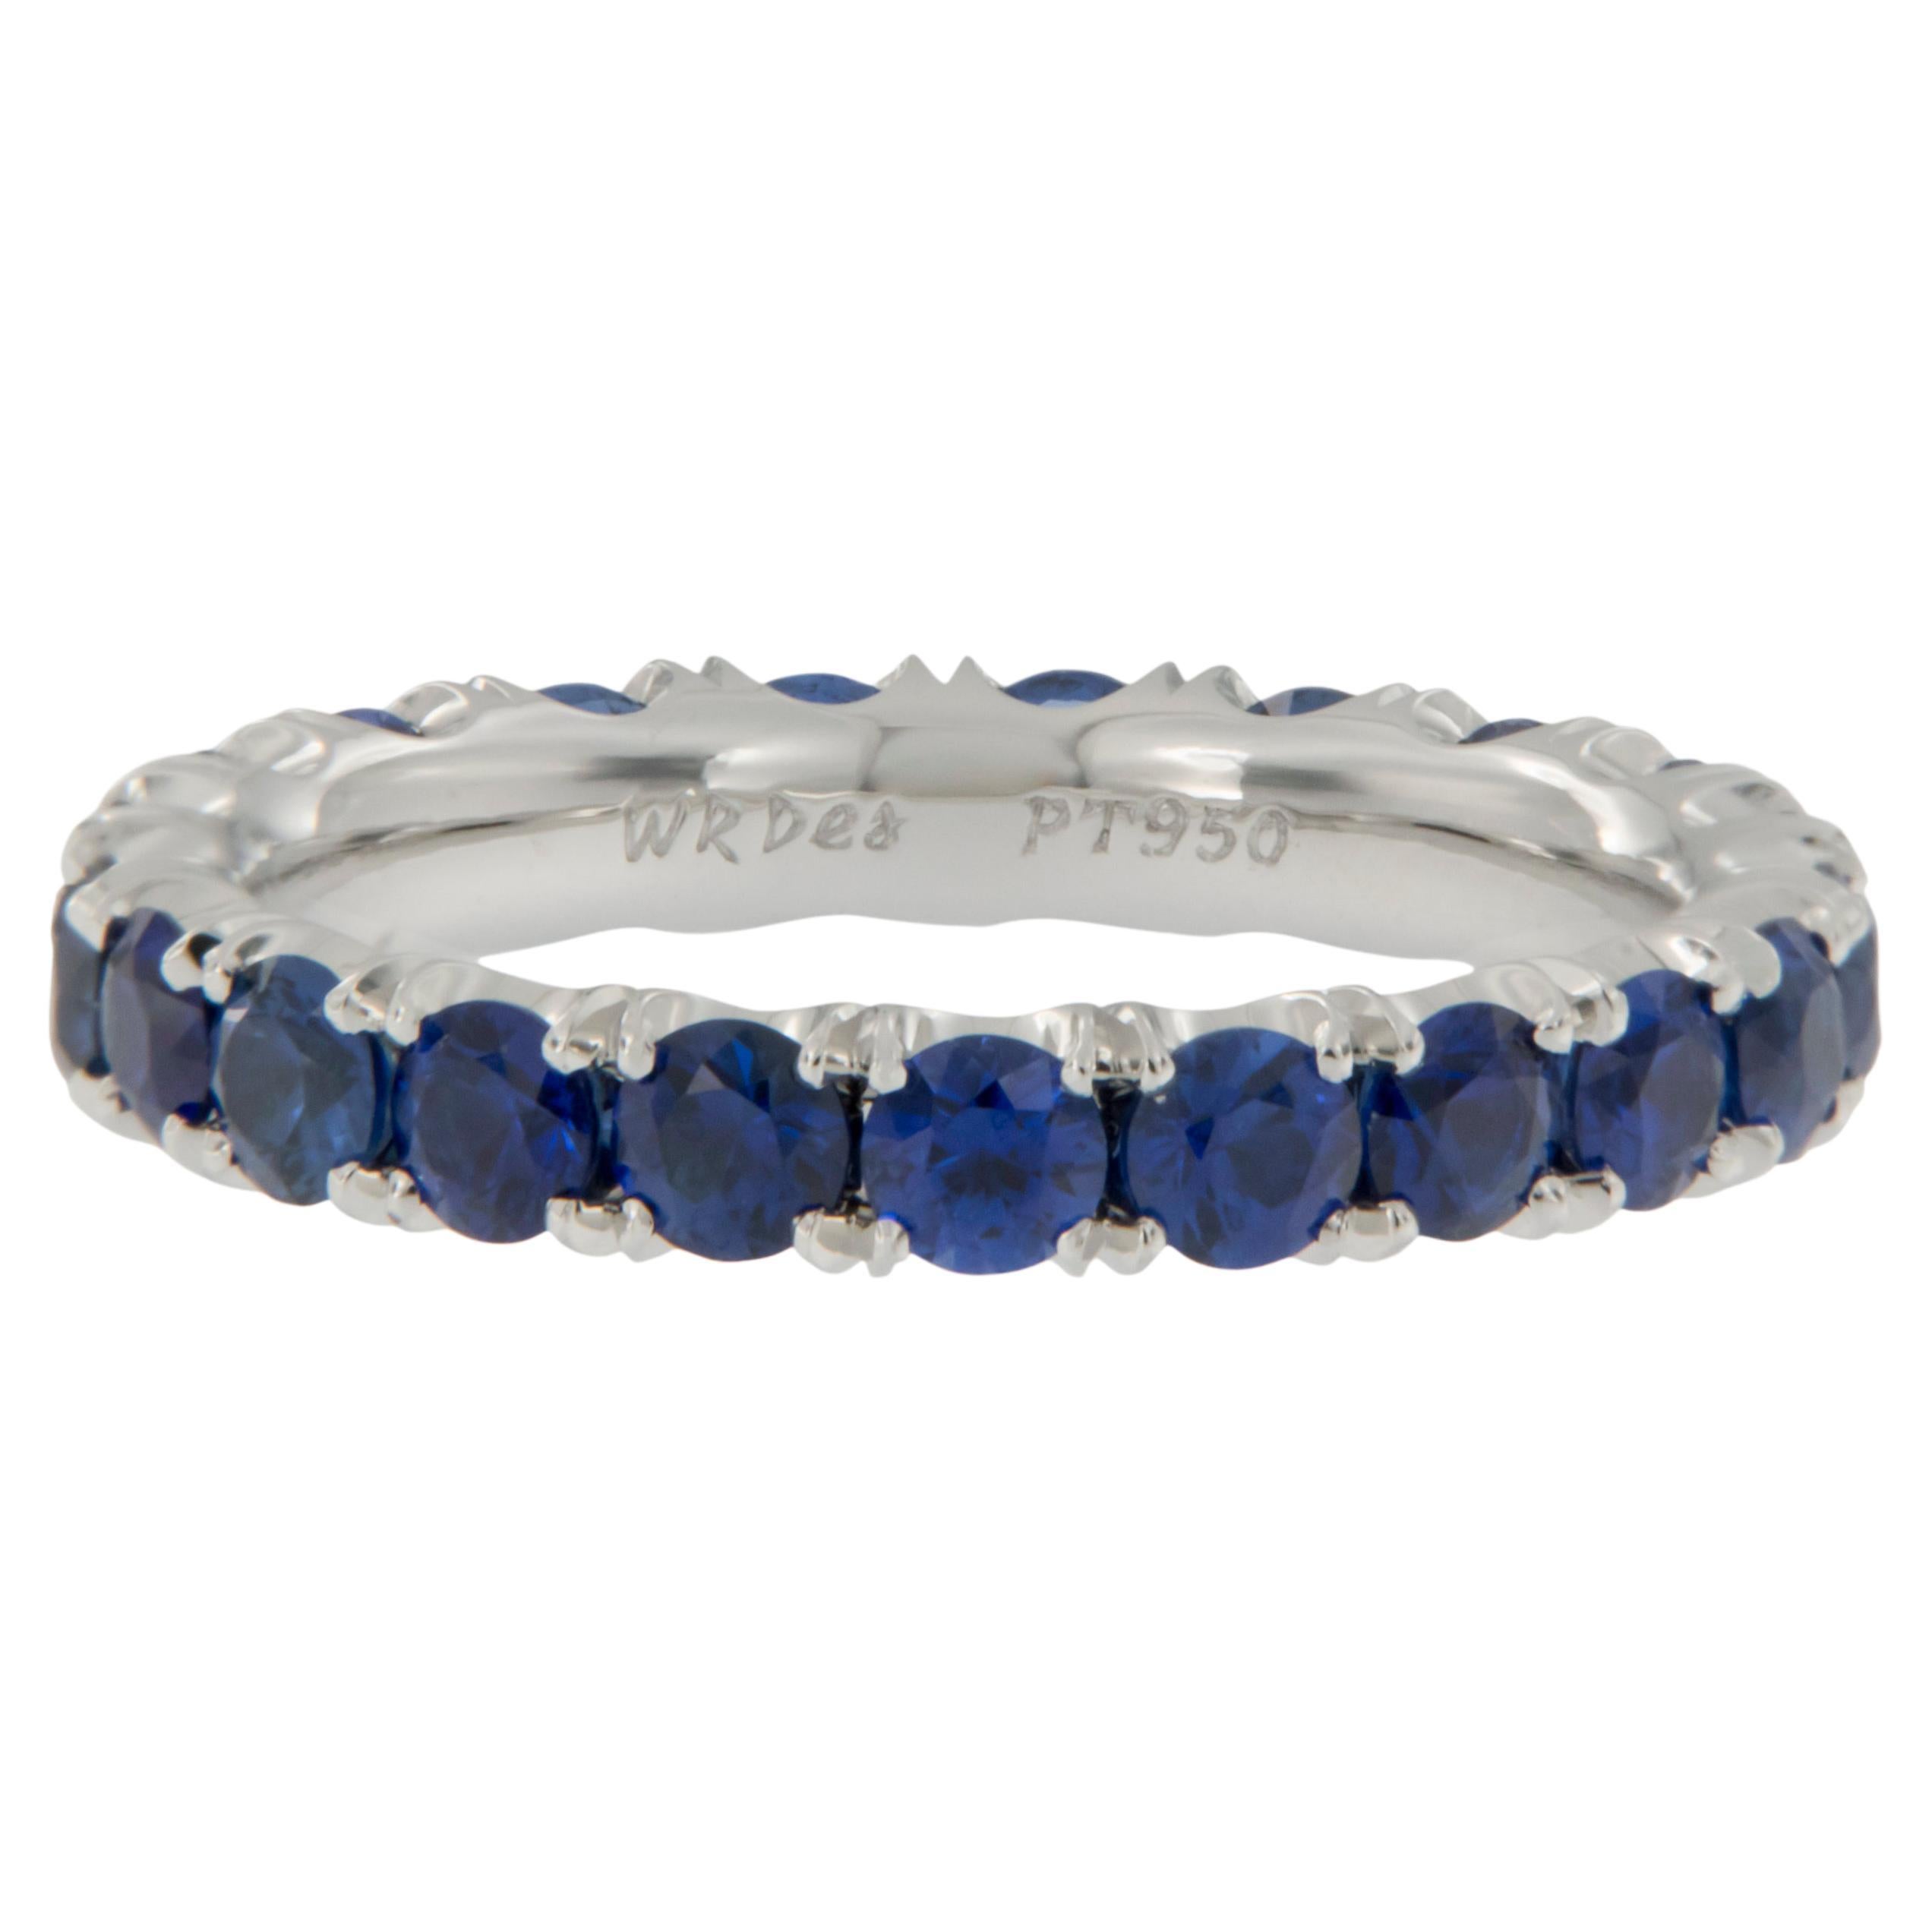 Made in New York & known for his superb, finest quality gems & craftsmanship, this set of unbelievable platinum eternity bands are jaw dropping gorgeous! Each fine, saturated blue sapphire is precision cut & matched for a stunning look! The rings